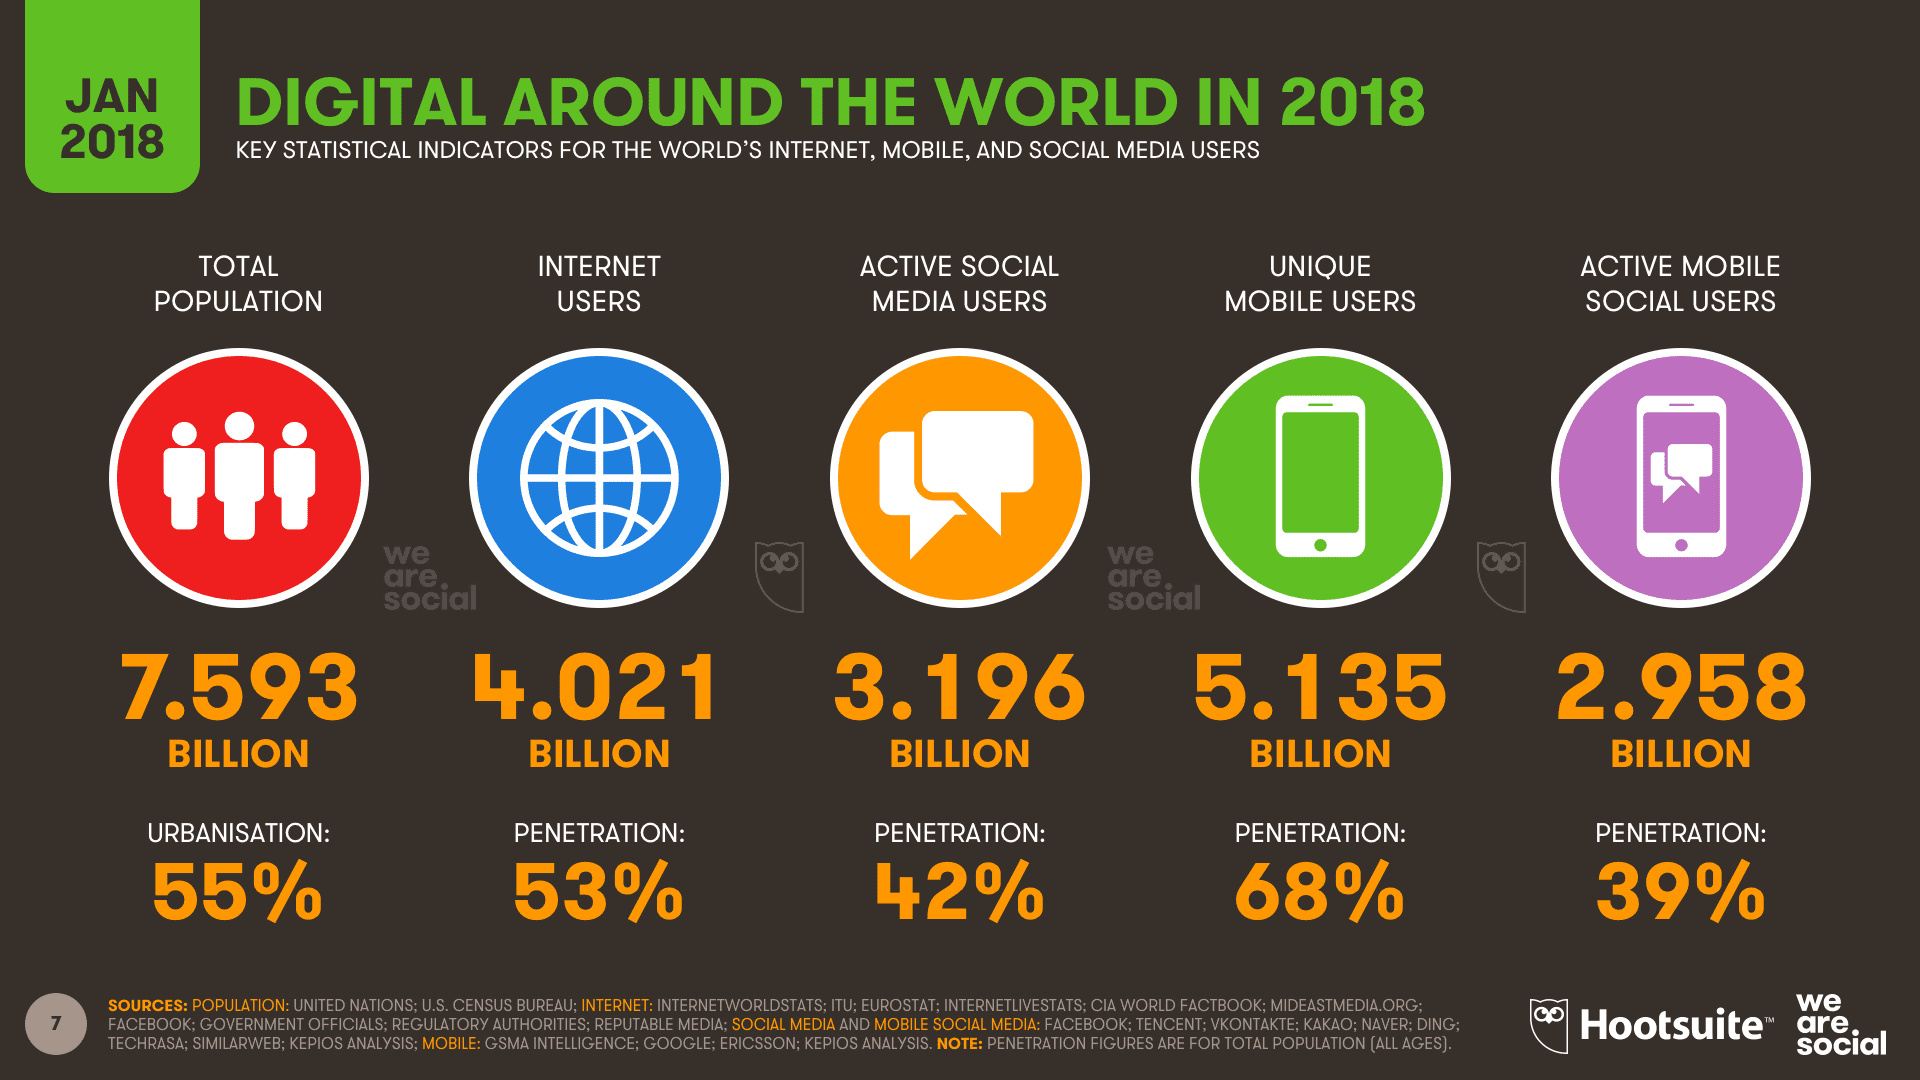 Statistics for the world's internet, mobile and social media users